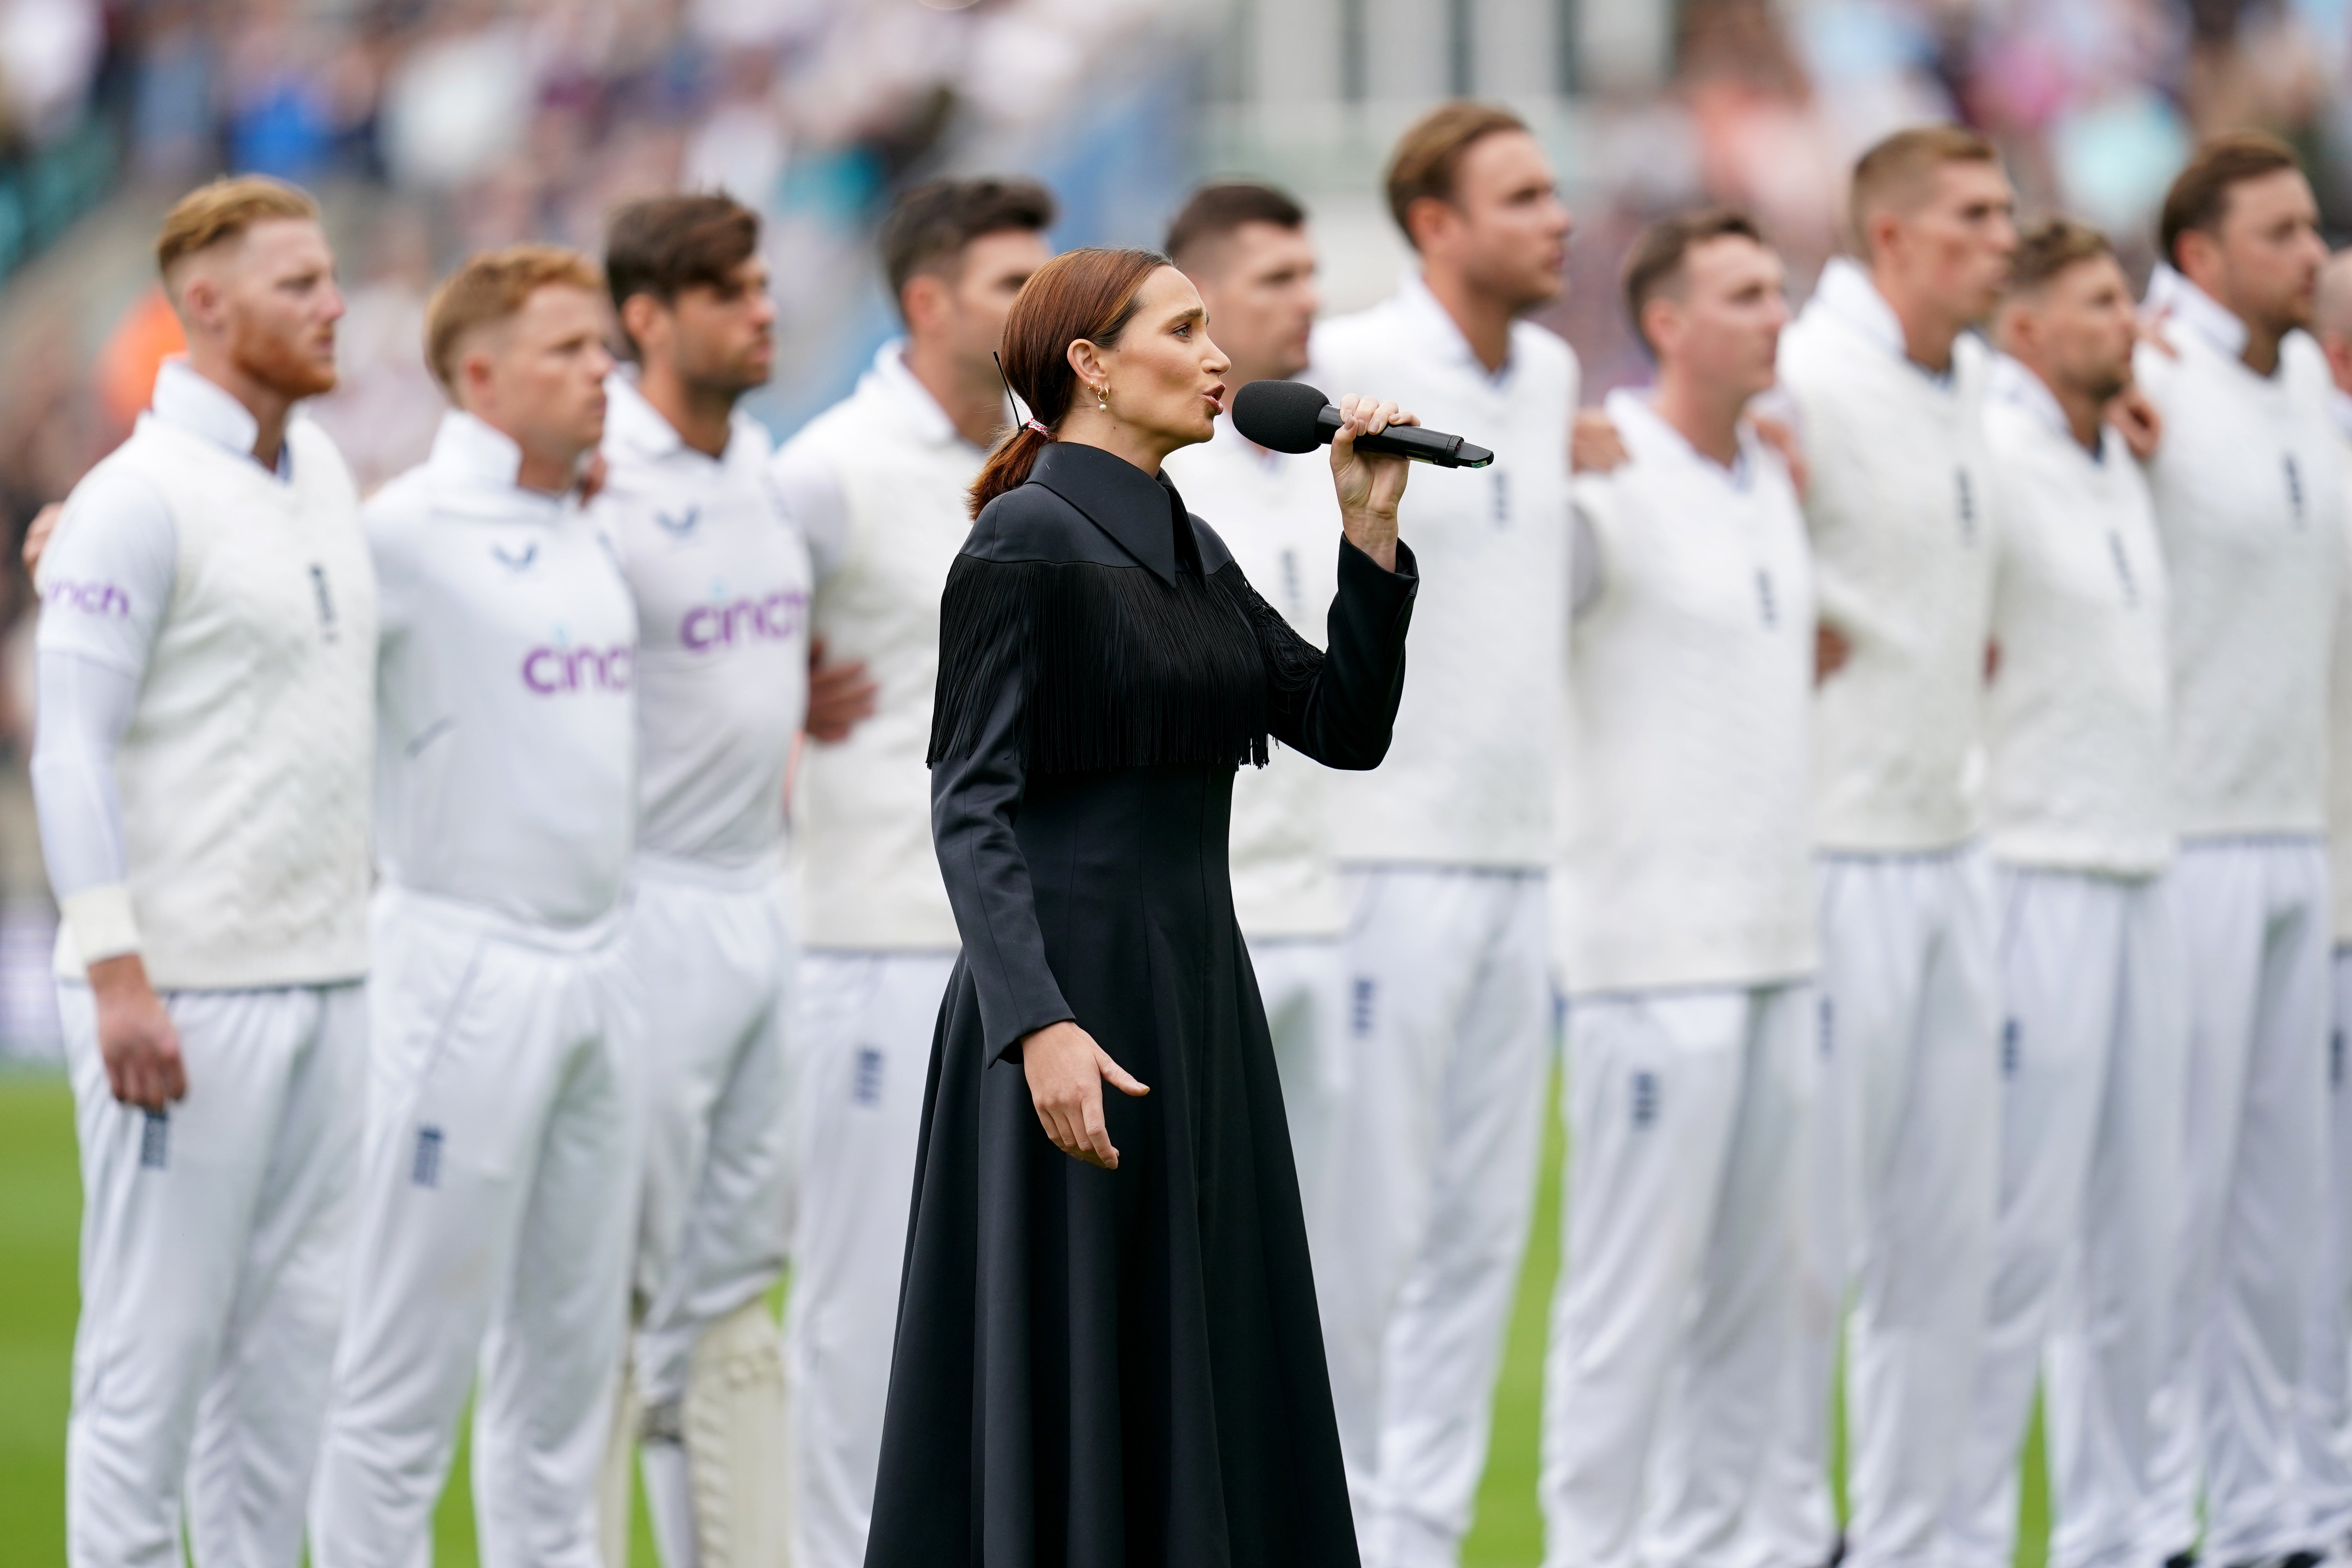 Laura Wright sings the national anthem and is joined by the England team (John Walton/PA)